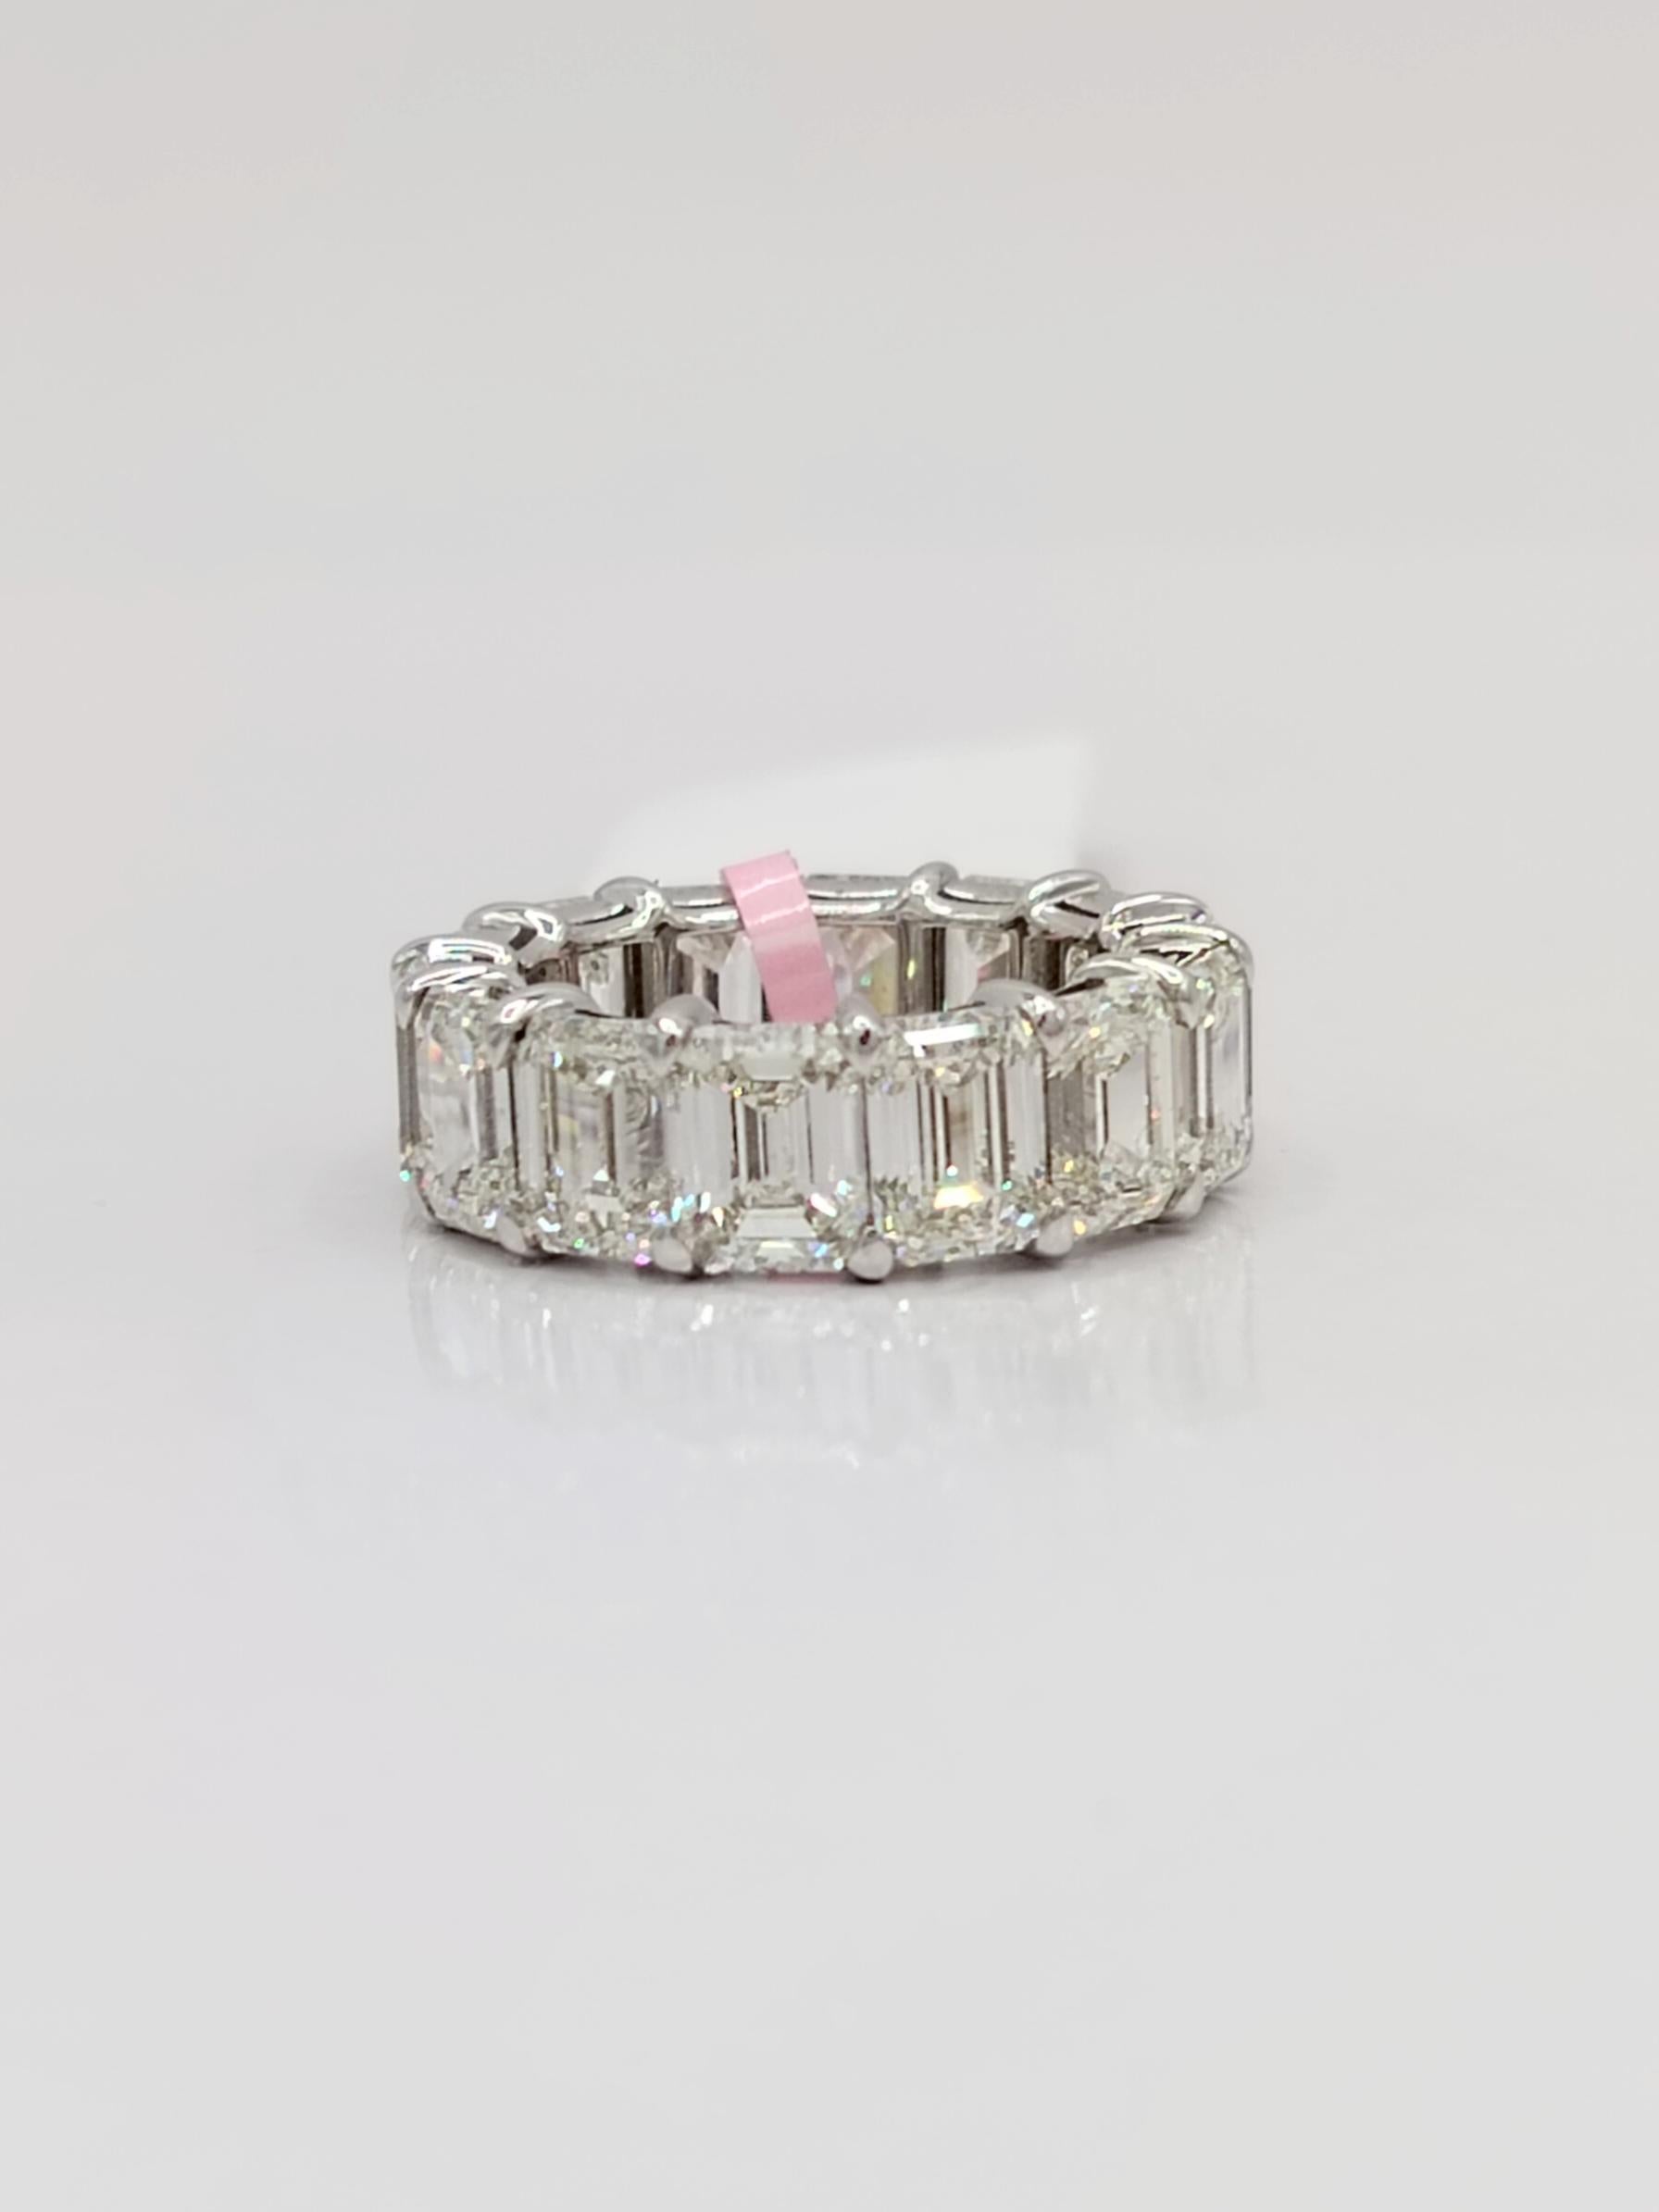 GIA Emerald Cut 1 Carat Each Diamond Eternity Band Ring in 18K White Gold For Sale 4